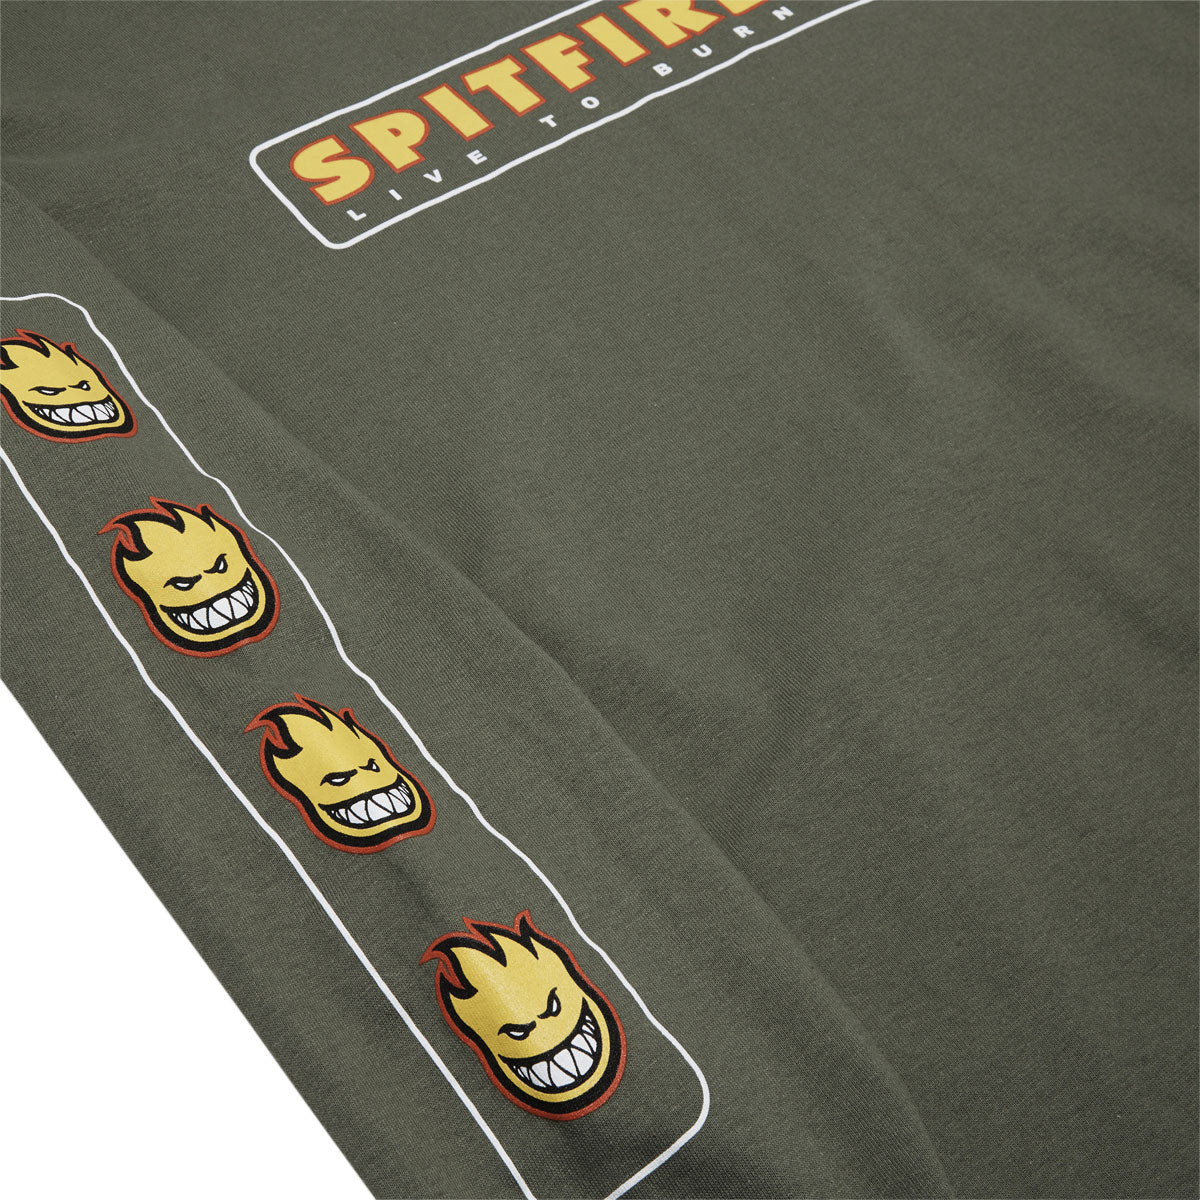 Spitfire LTB Long Sleeve Sleeve T-Shirt - Military Green image 2